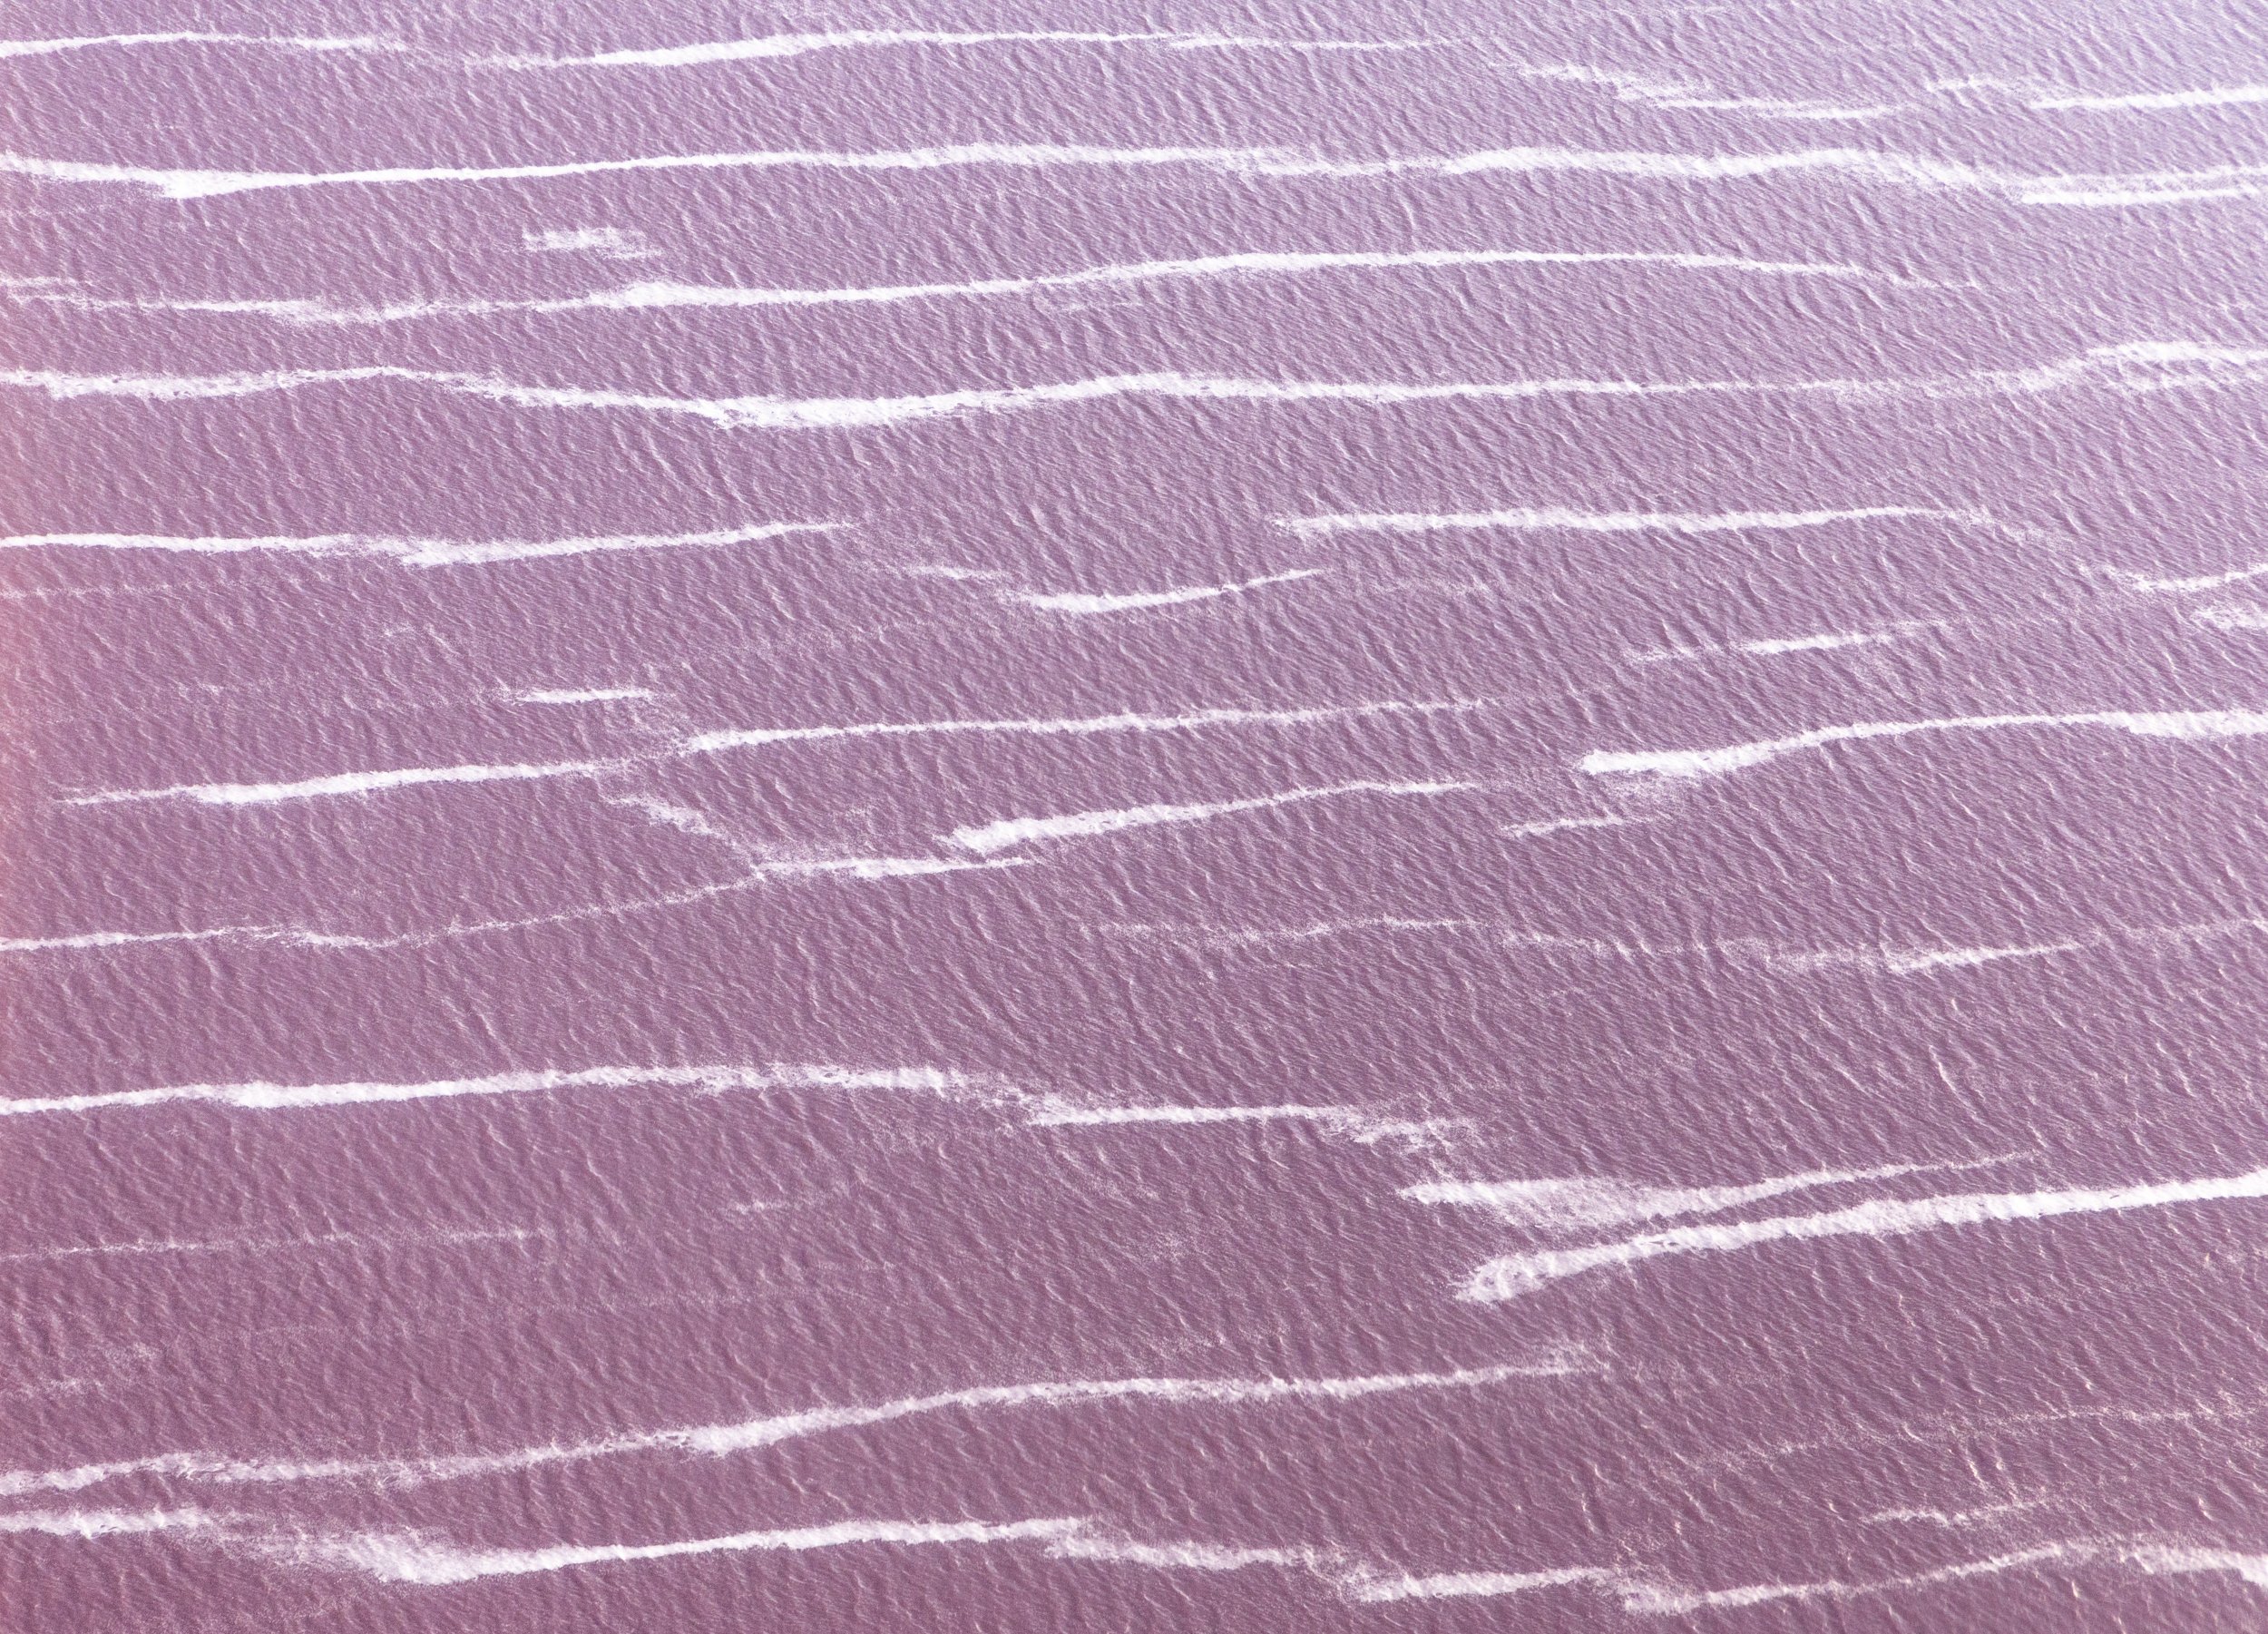  Pink water and seafoam in the hypersaline north arm of Great Salt Lake.  The water is pink because the only organisms that can survive here - extreme salt-loving microbes - are pink.  The north arm is truly a dead sea - microbialites, brine flies, b